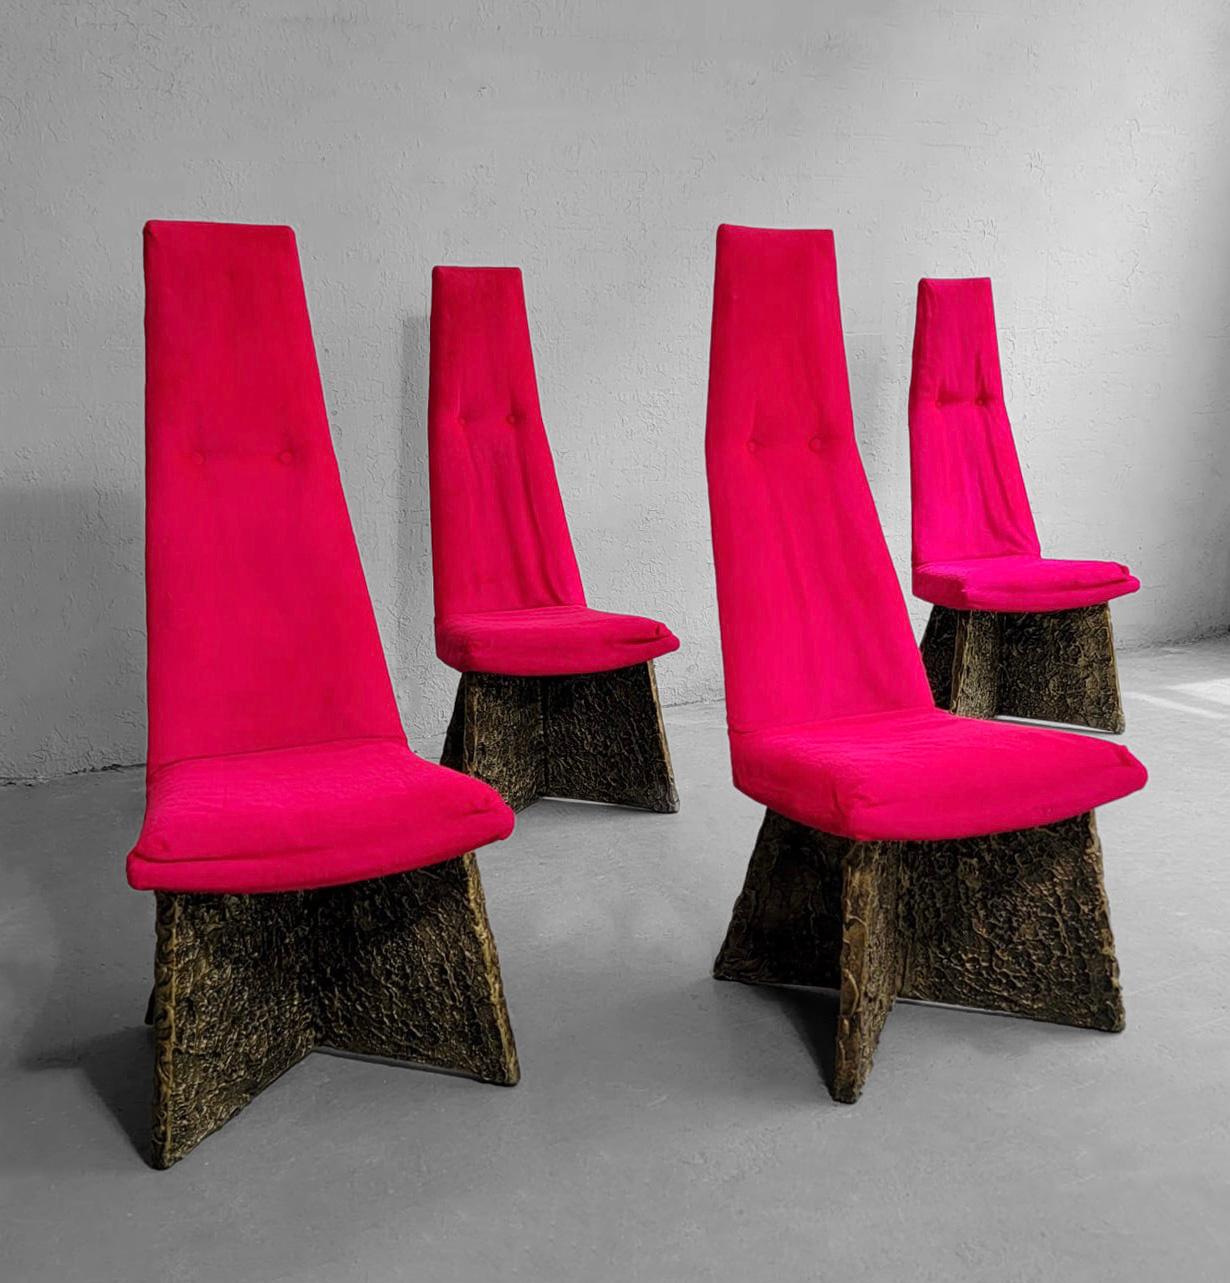 American Midcentury Brutalist High Back Chairs by Adrian Pearsall For Sale